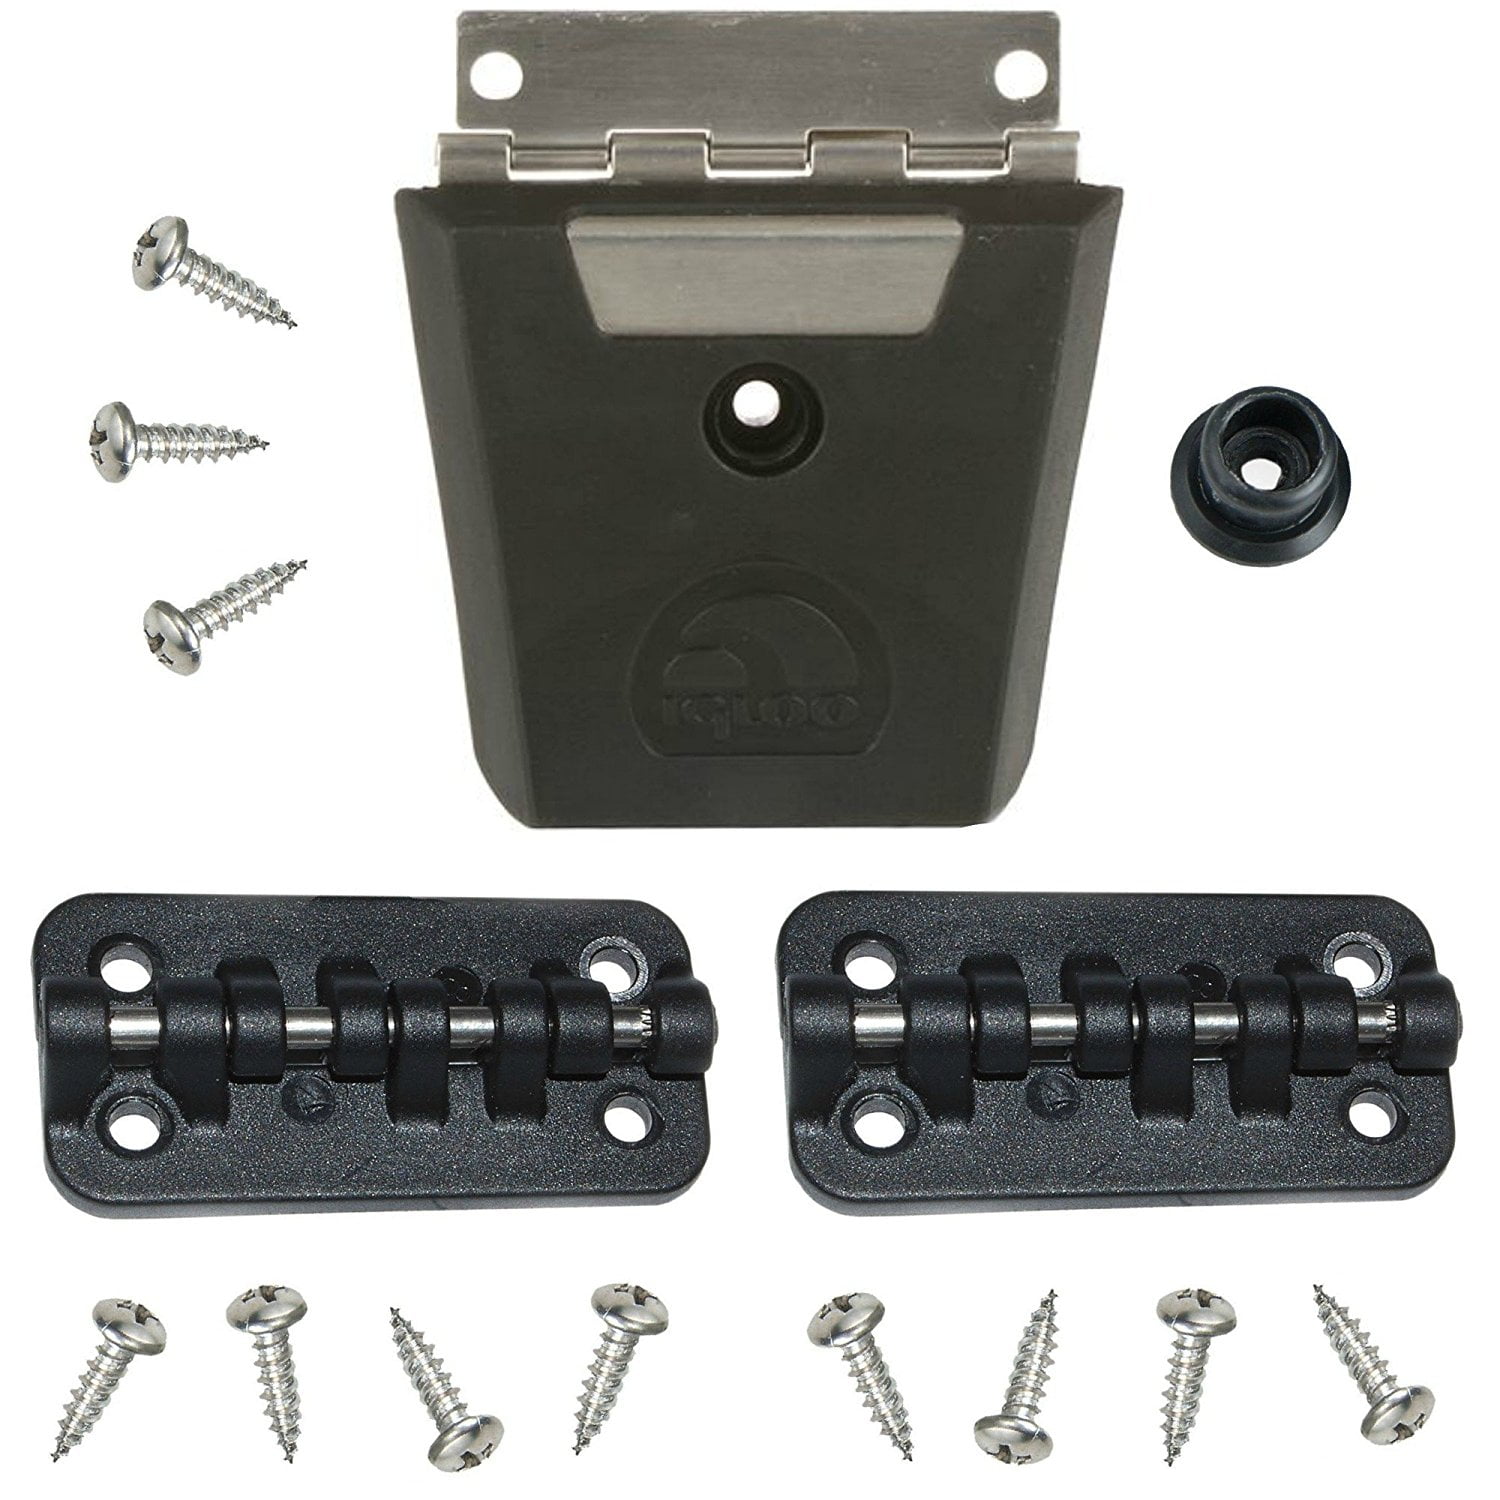 Igloo Hybrid Stainless Plastic Latch Stainless Steel Hinges Black/Silver 